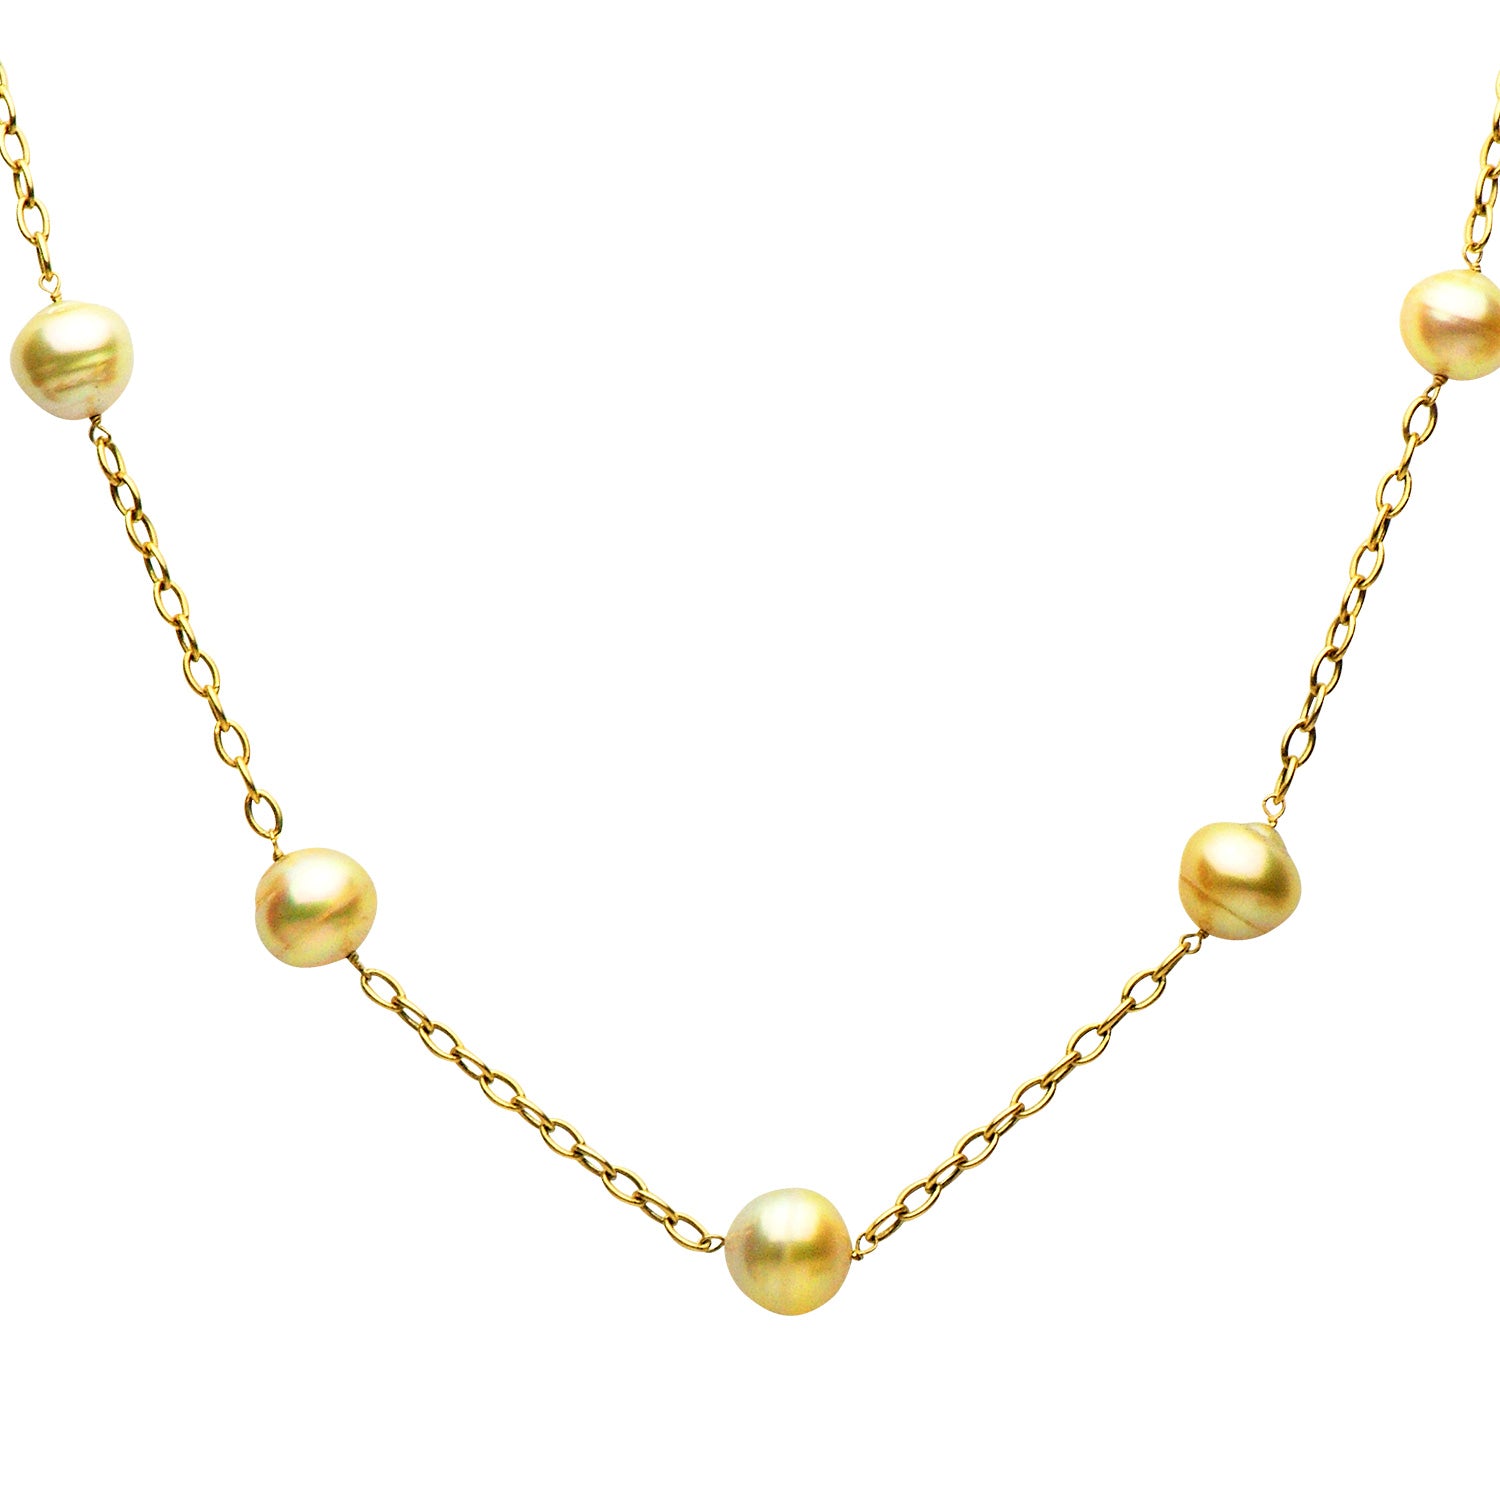 14KY Golden South Sea Pearl Tincup, 10-12mm